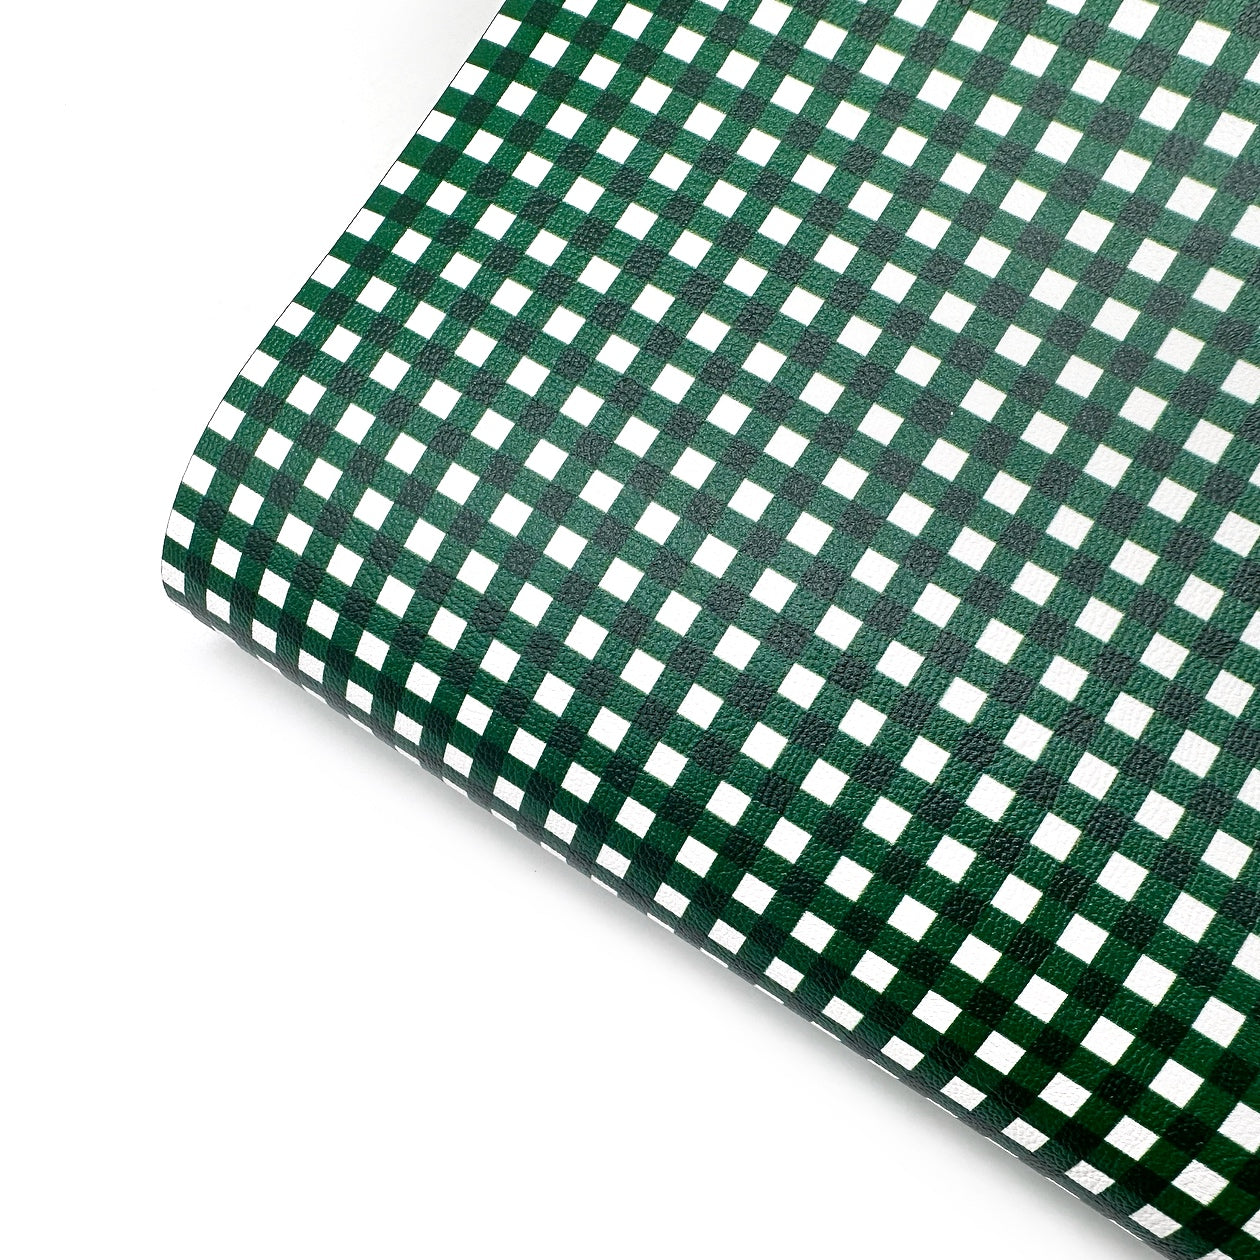 Bottle Green Gingham Standard Premium Faux Leather Fabric Sheets